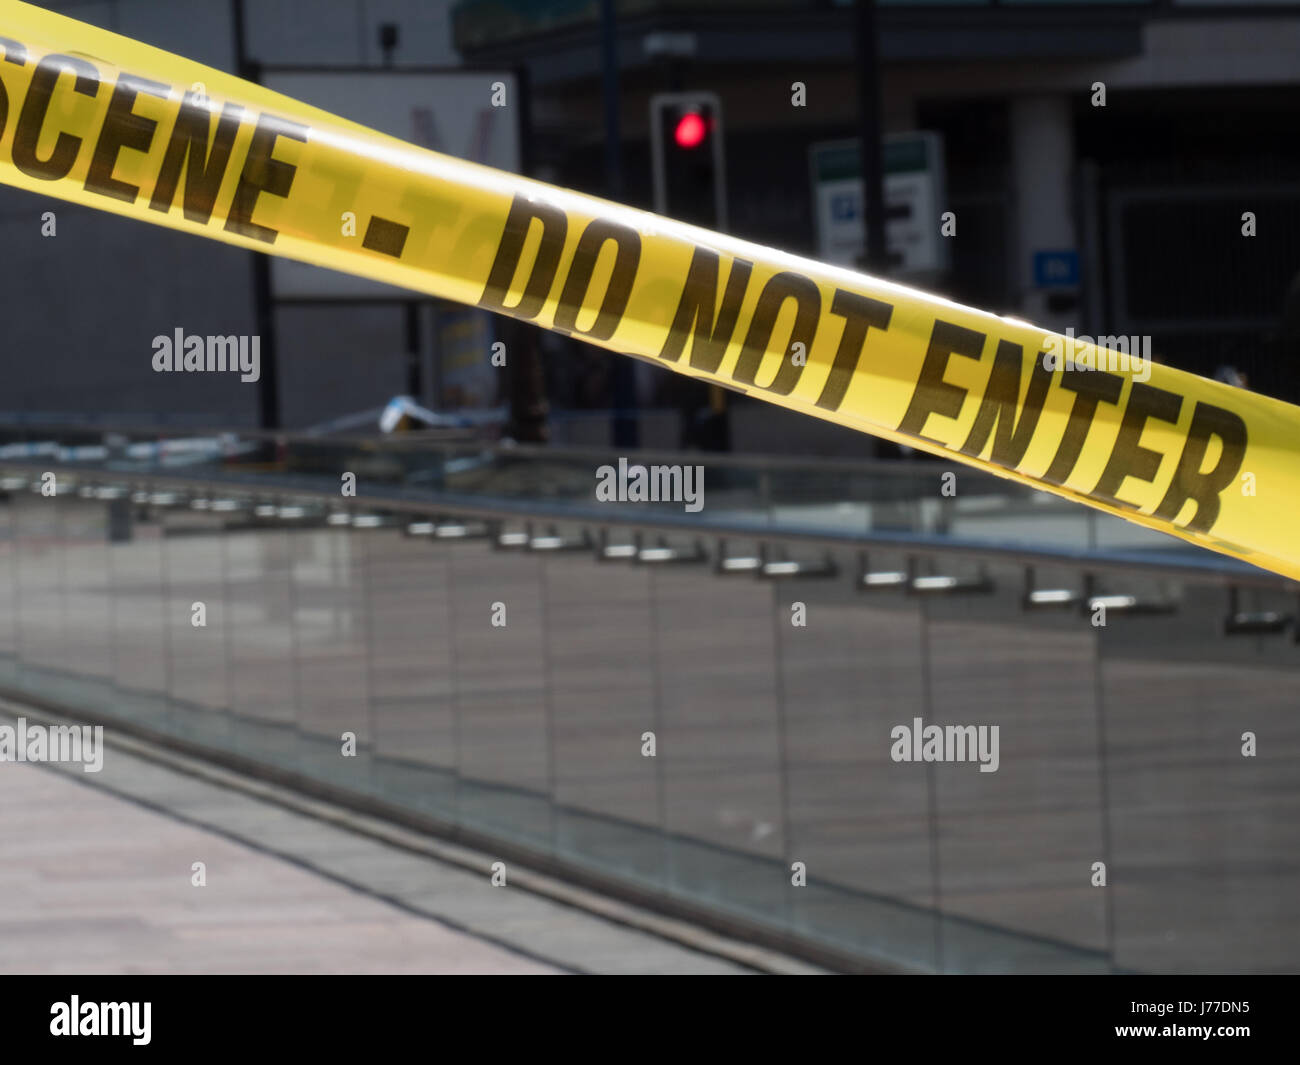 Manchester, UK. 23rd May, 2017. The police crime scene tape used as a cordon near to the Manchester Arena in Manchester city centre (with Harvey Nichols store and a City of Manchester sign visible), the day after a suicide bomb attack killed 22 as crowds were leaving the Ariana Grande concert at the Manchester Arena. Credit: Chris Rogers/Alamy Live News Stock Photo